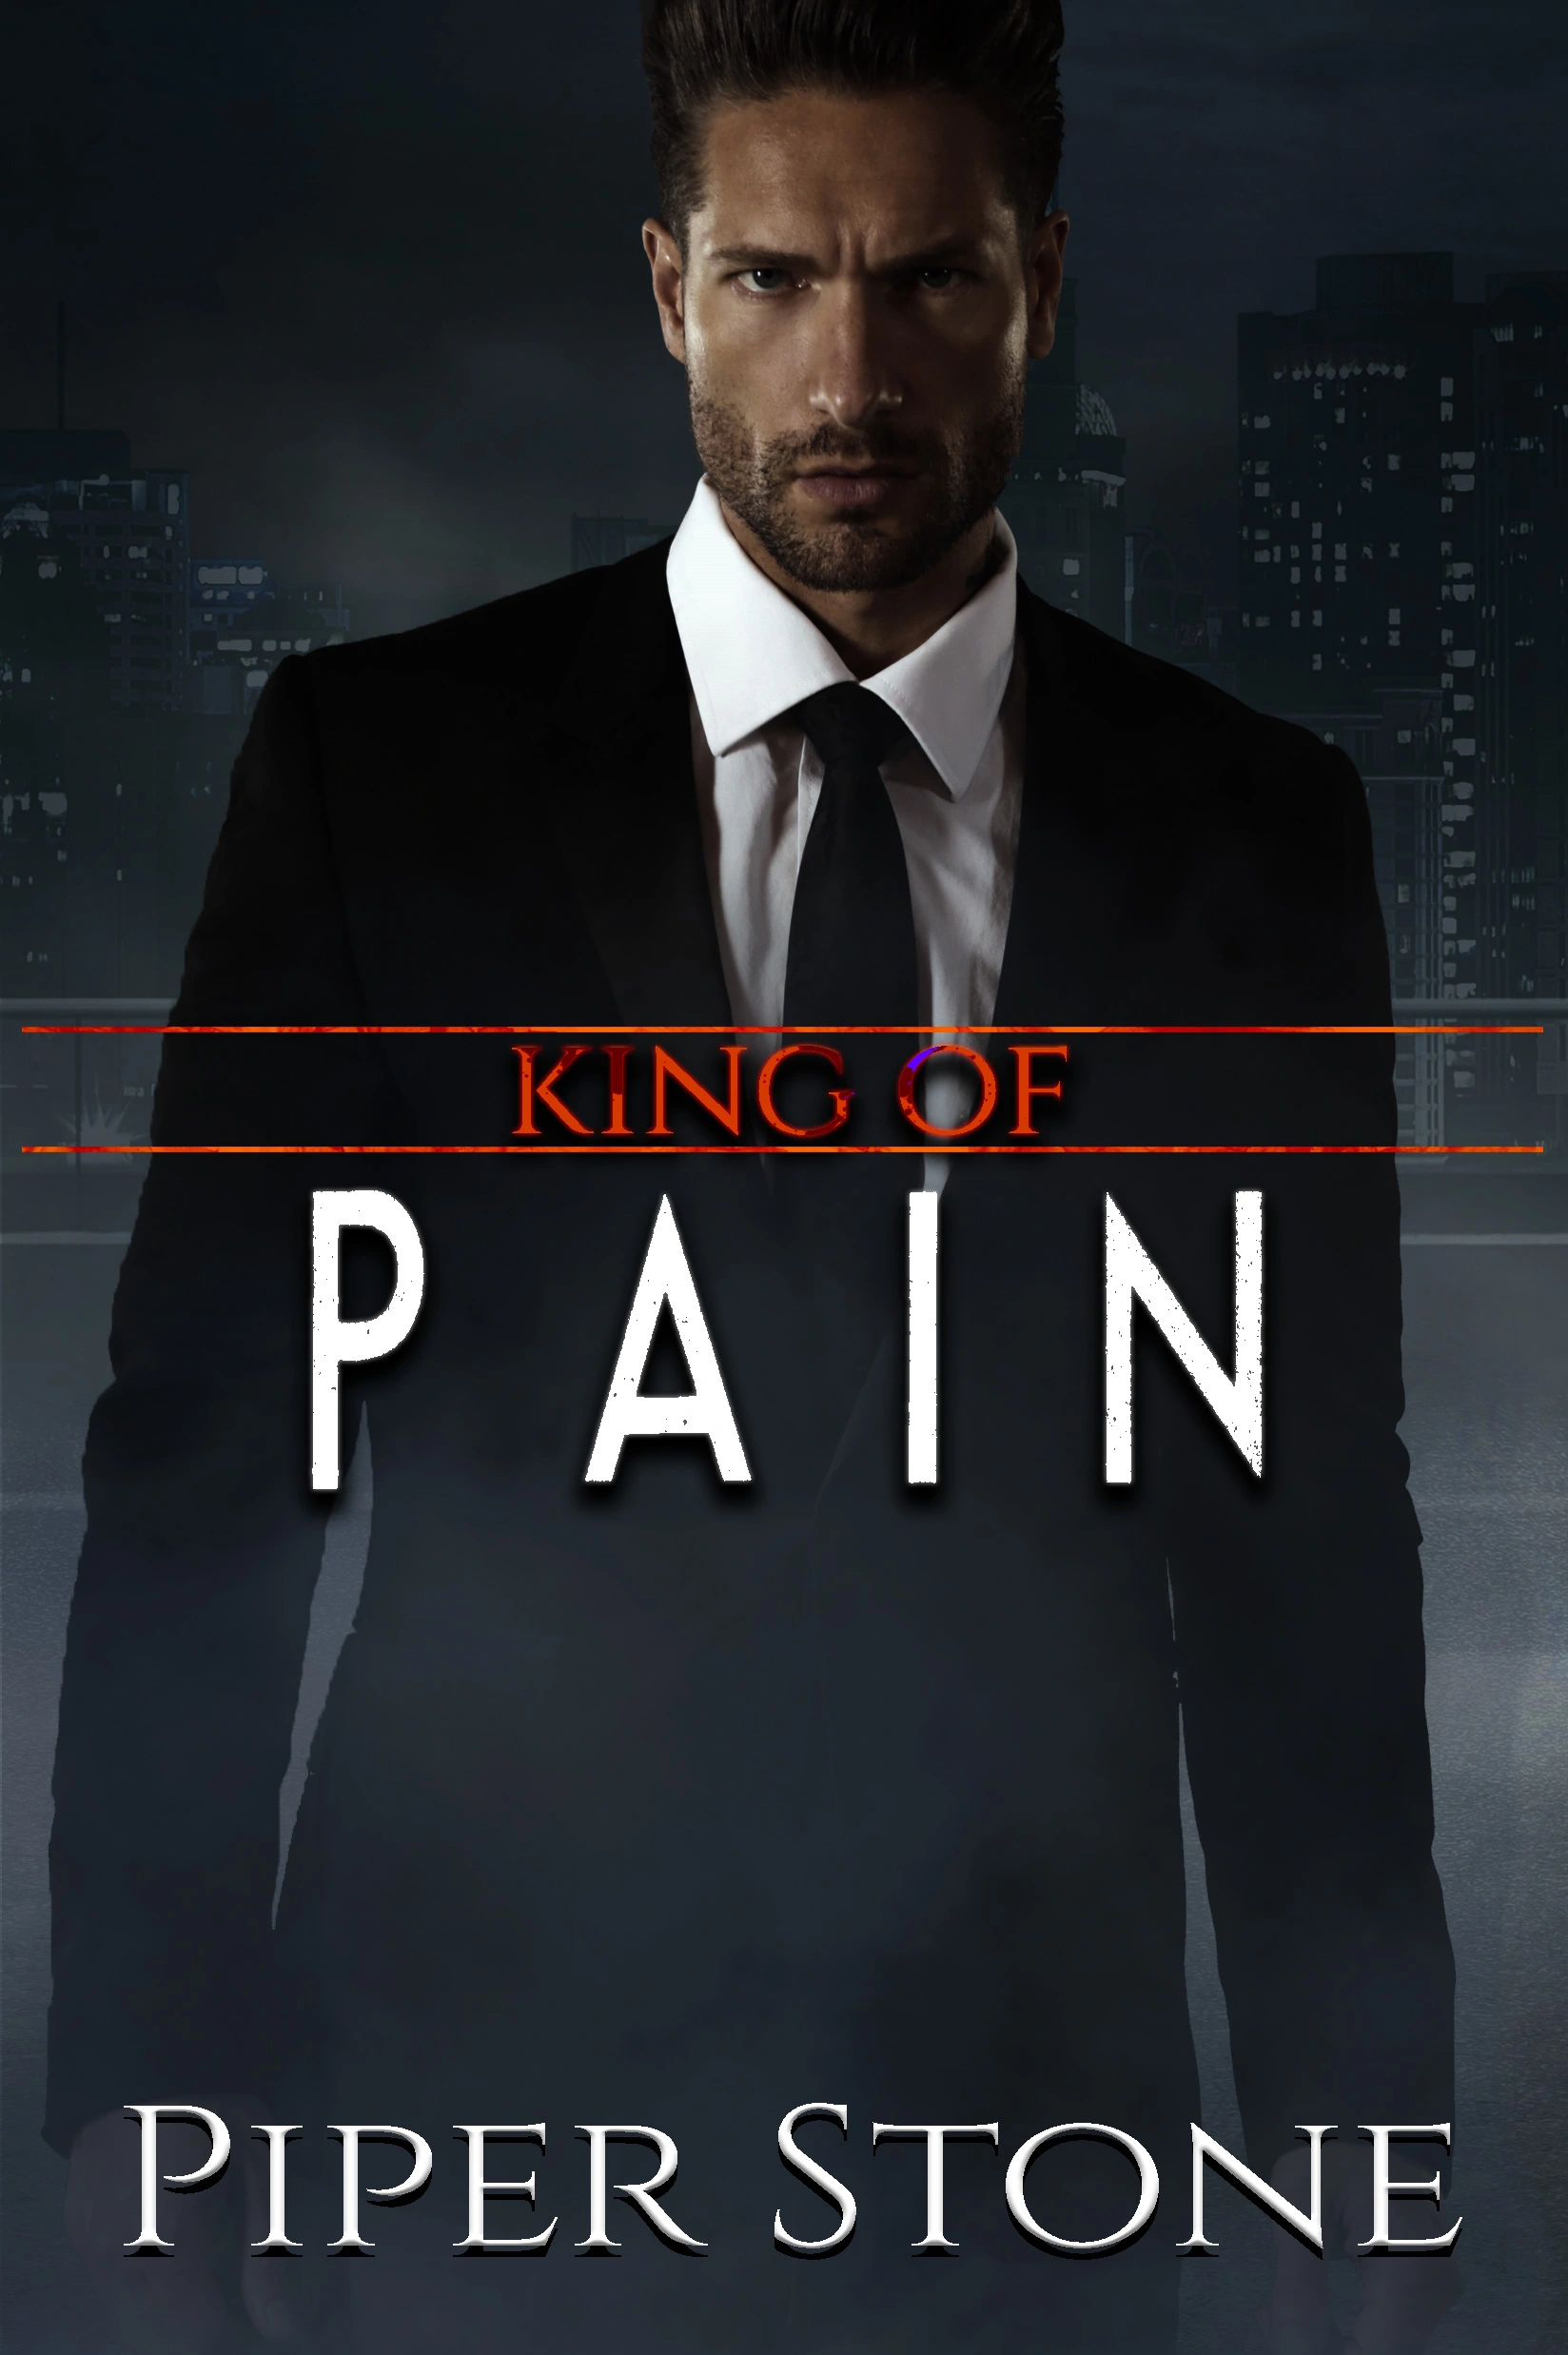 King-of-Pain Piper Stone